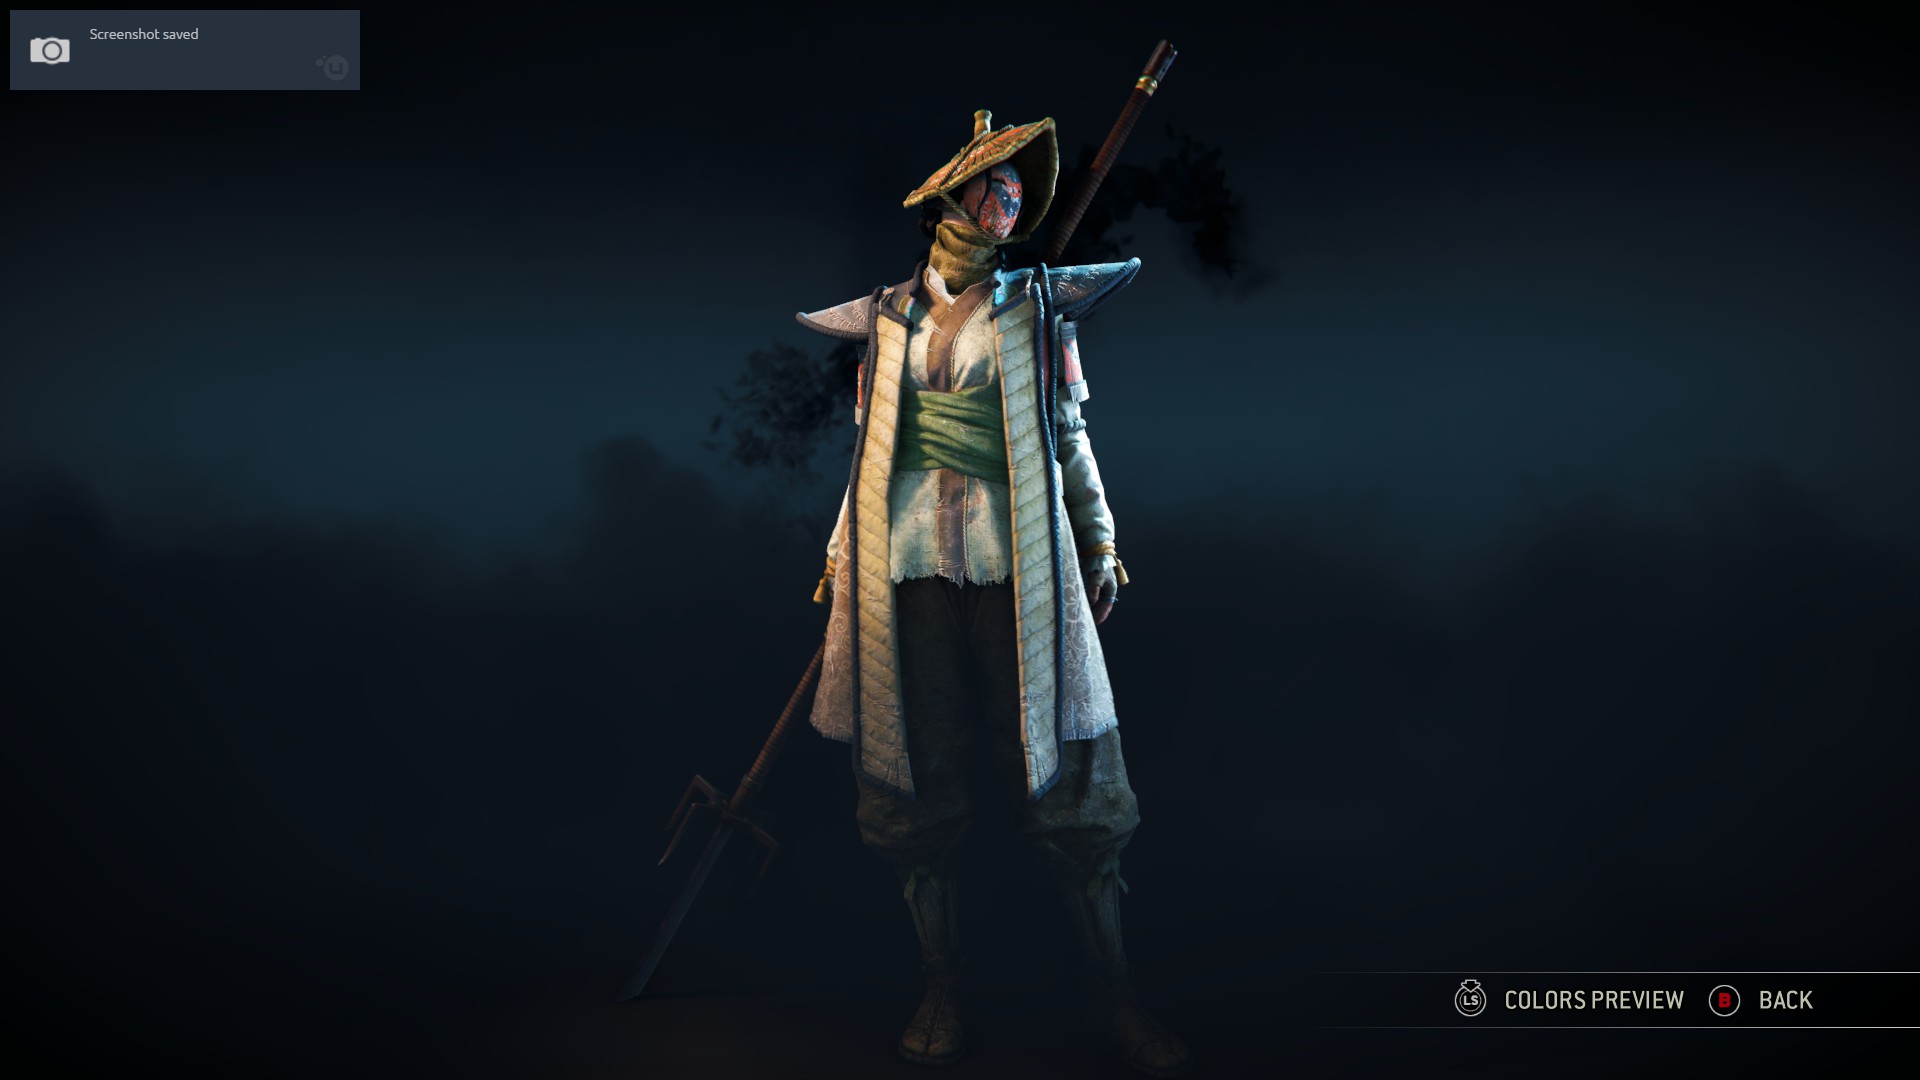 Artemis Nobushi, the Girl with the Secret Identity [Finished and ready for approval] 3F2E0F1DB20A10AEC73A5DD6F26A1DA76104E461